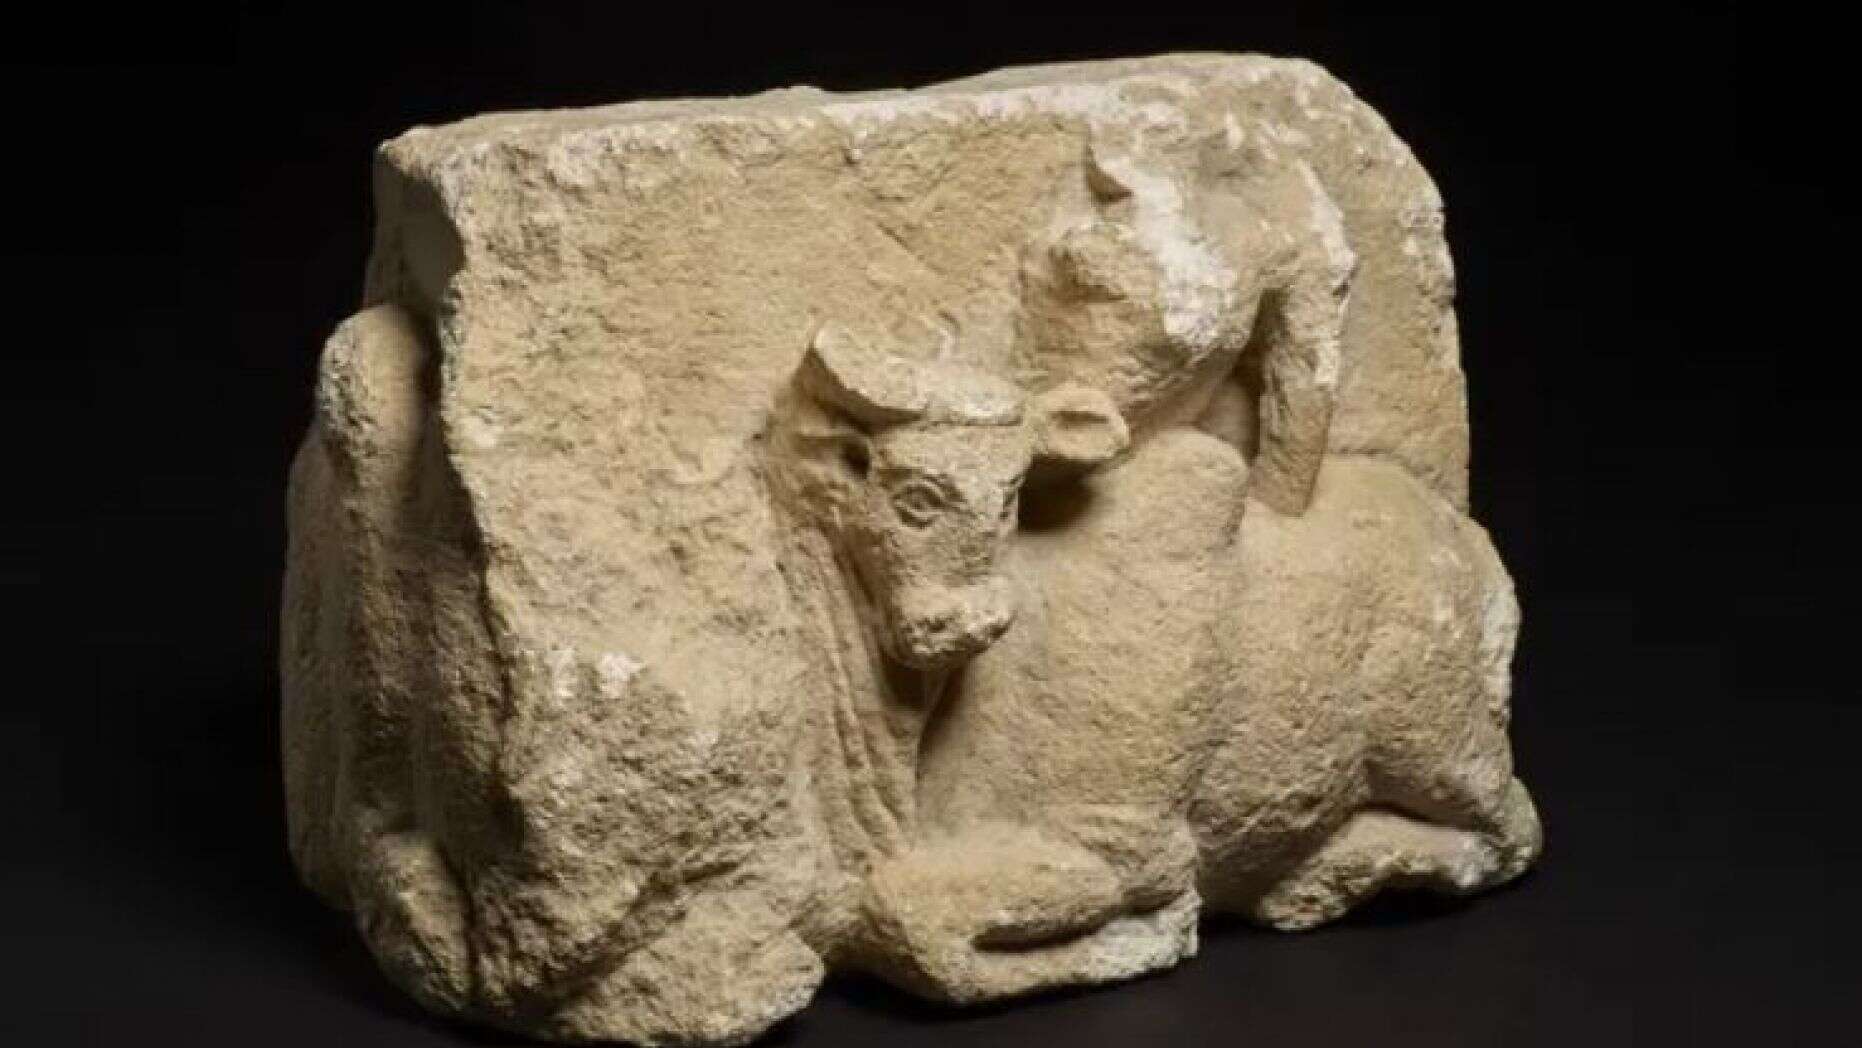 Ancient sculpture looted from Afghanistan returned after being found on auctioneer website